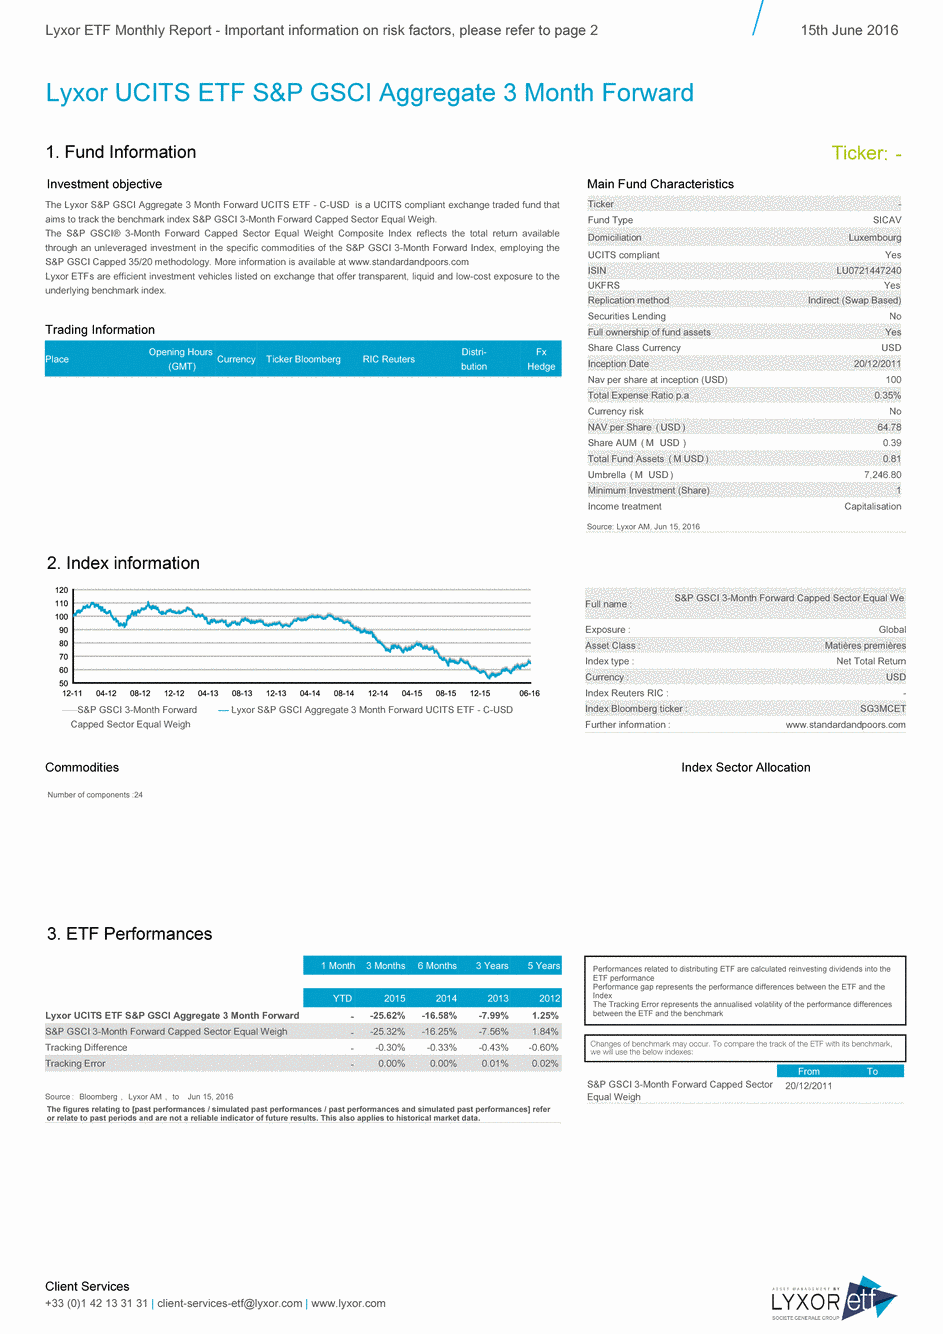 Reporting LYXOR UCITS ETF S&P GSCI Aggregate 3 Month Forward - C-USD - 15/06/2016 - Anglais